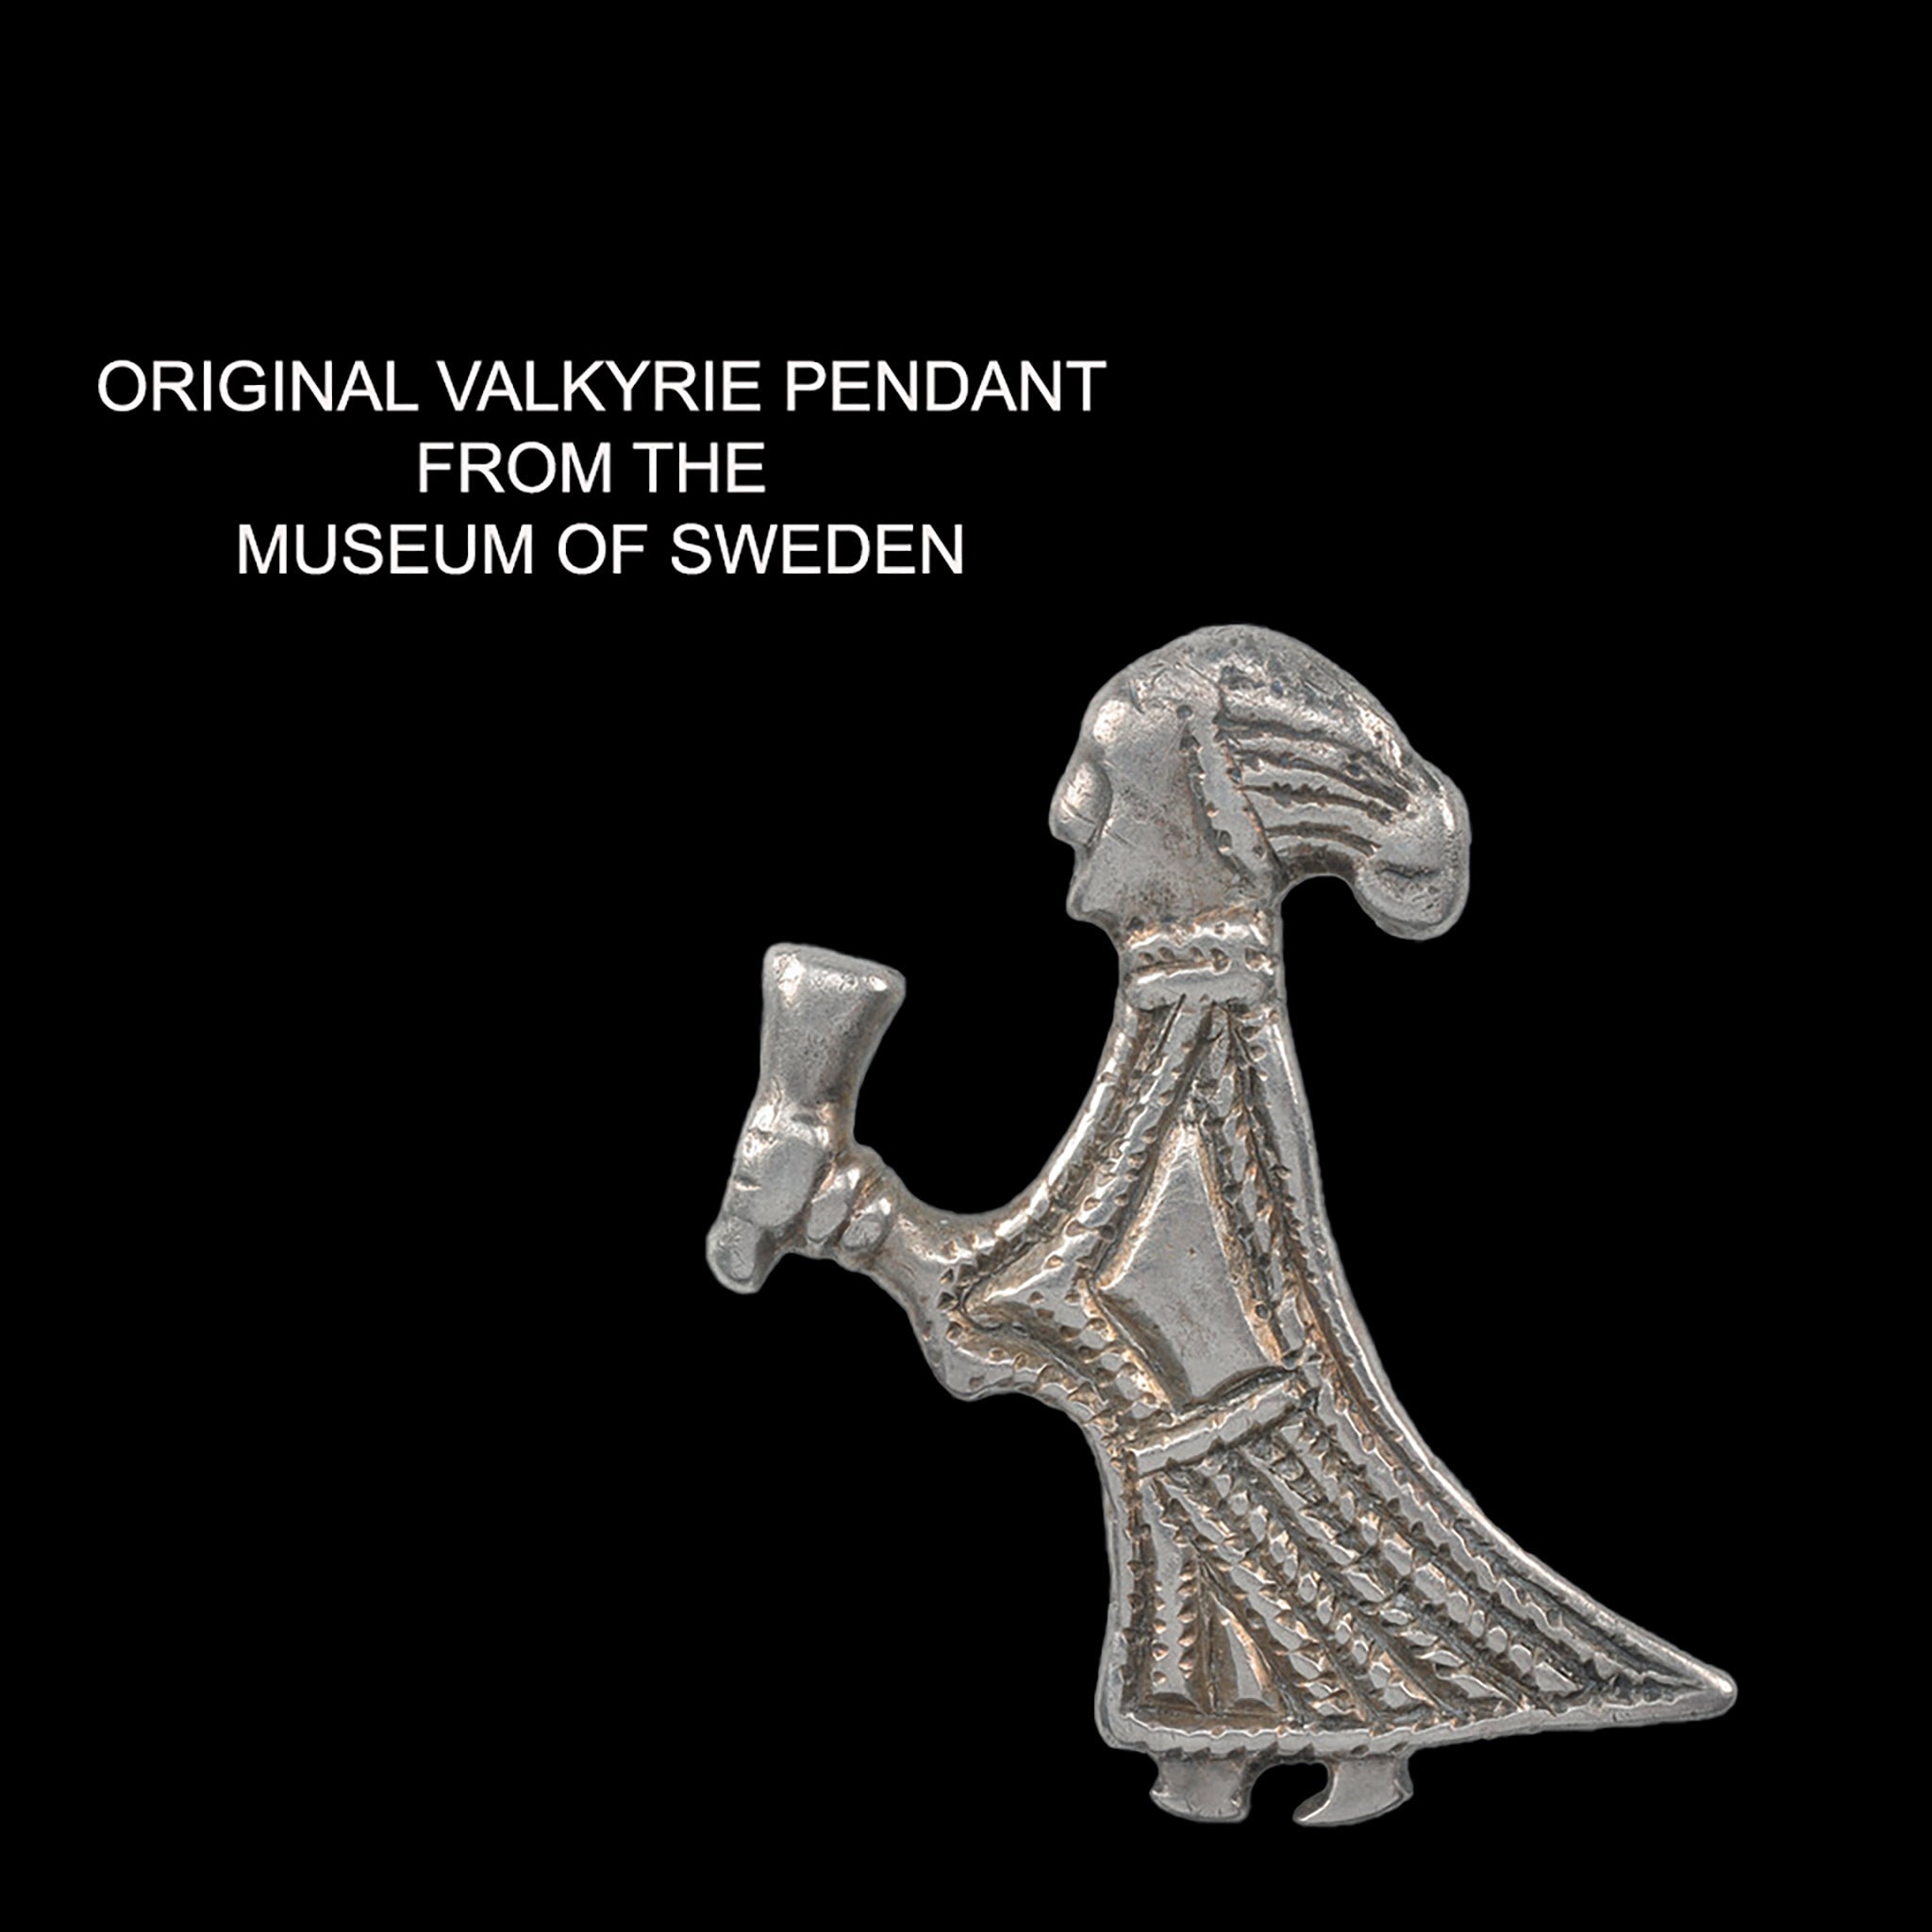 Original Valkyrie Pendant from The Museum of Sweden